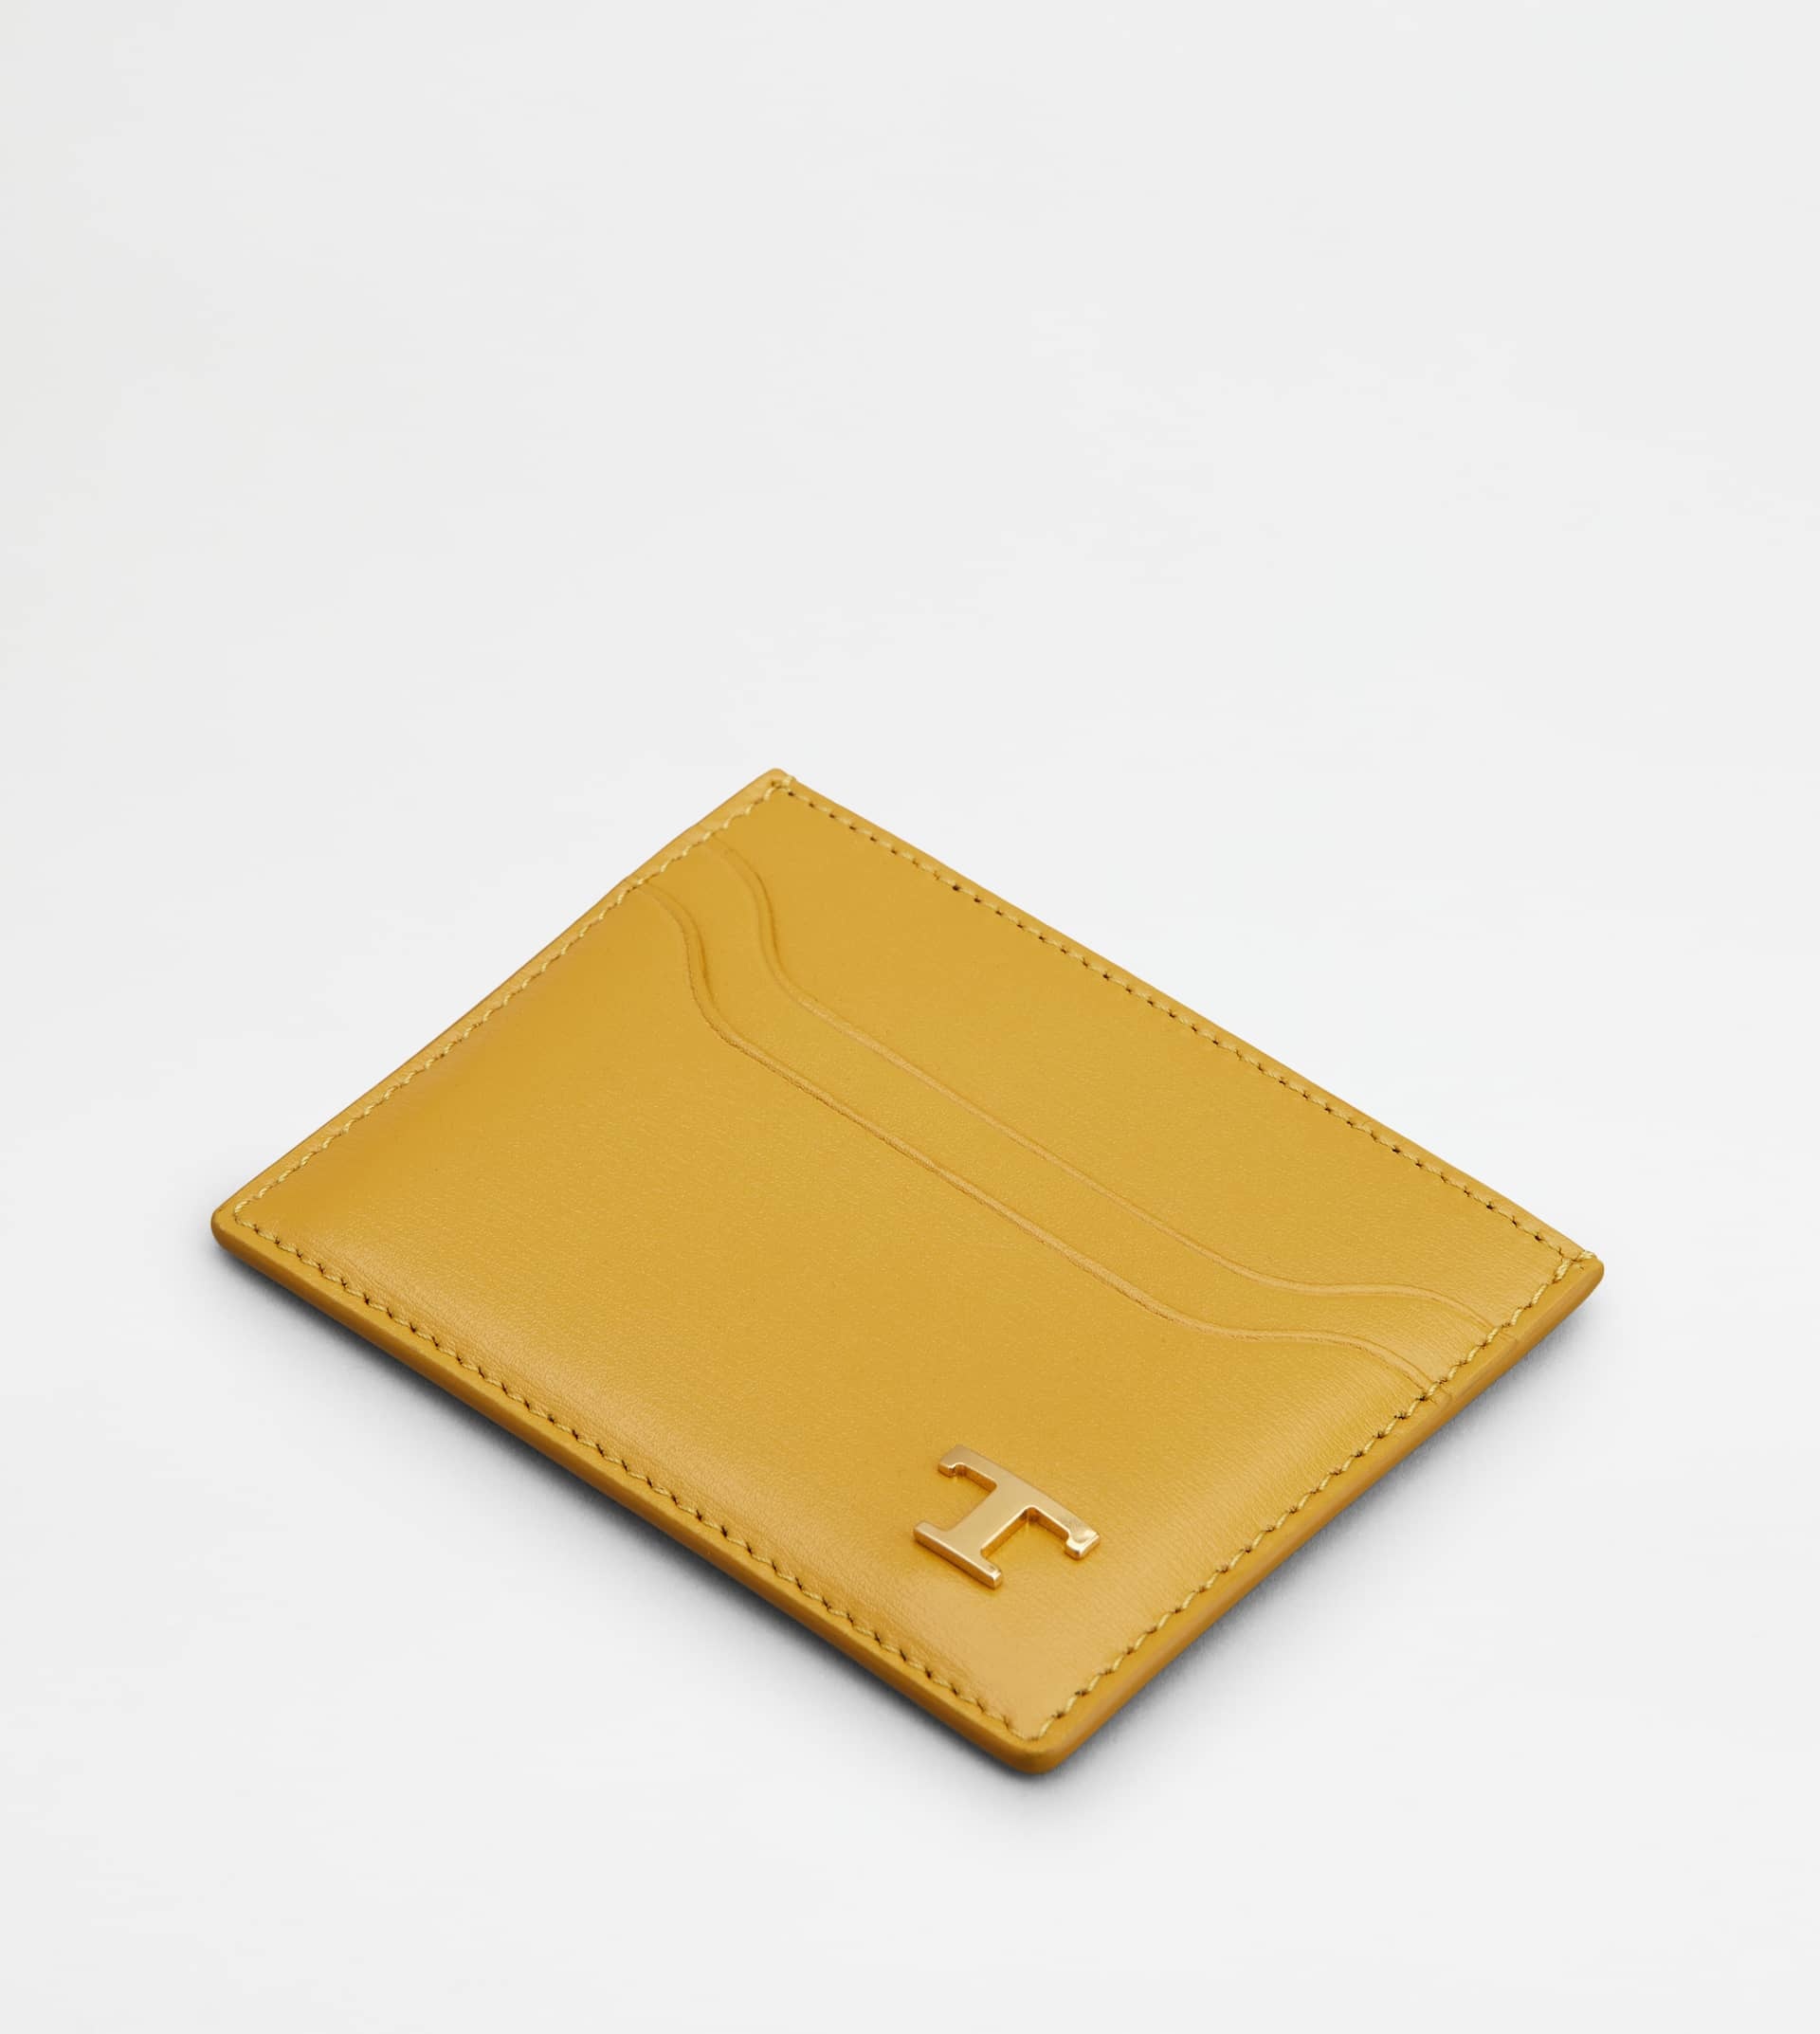 TOD'S CARD HOLDER IN LEATHER - YELLOW - 3